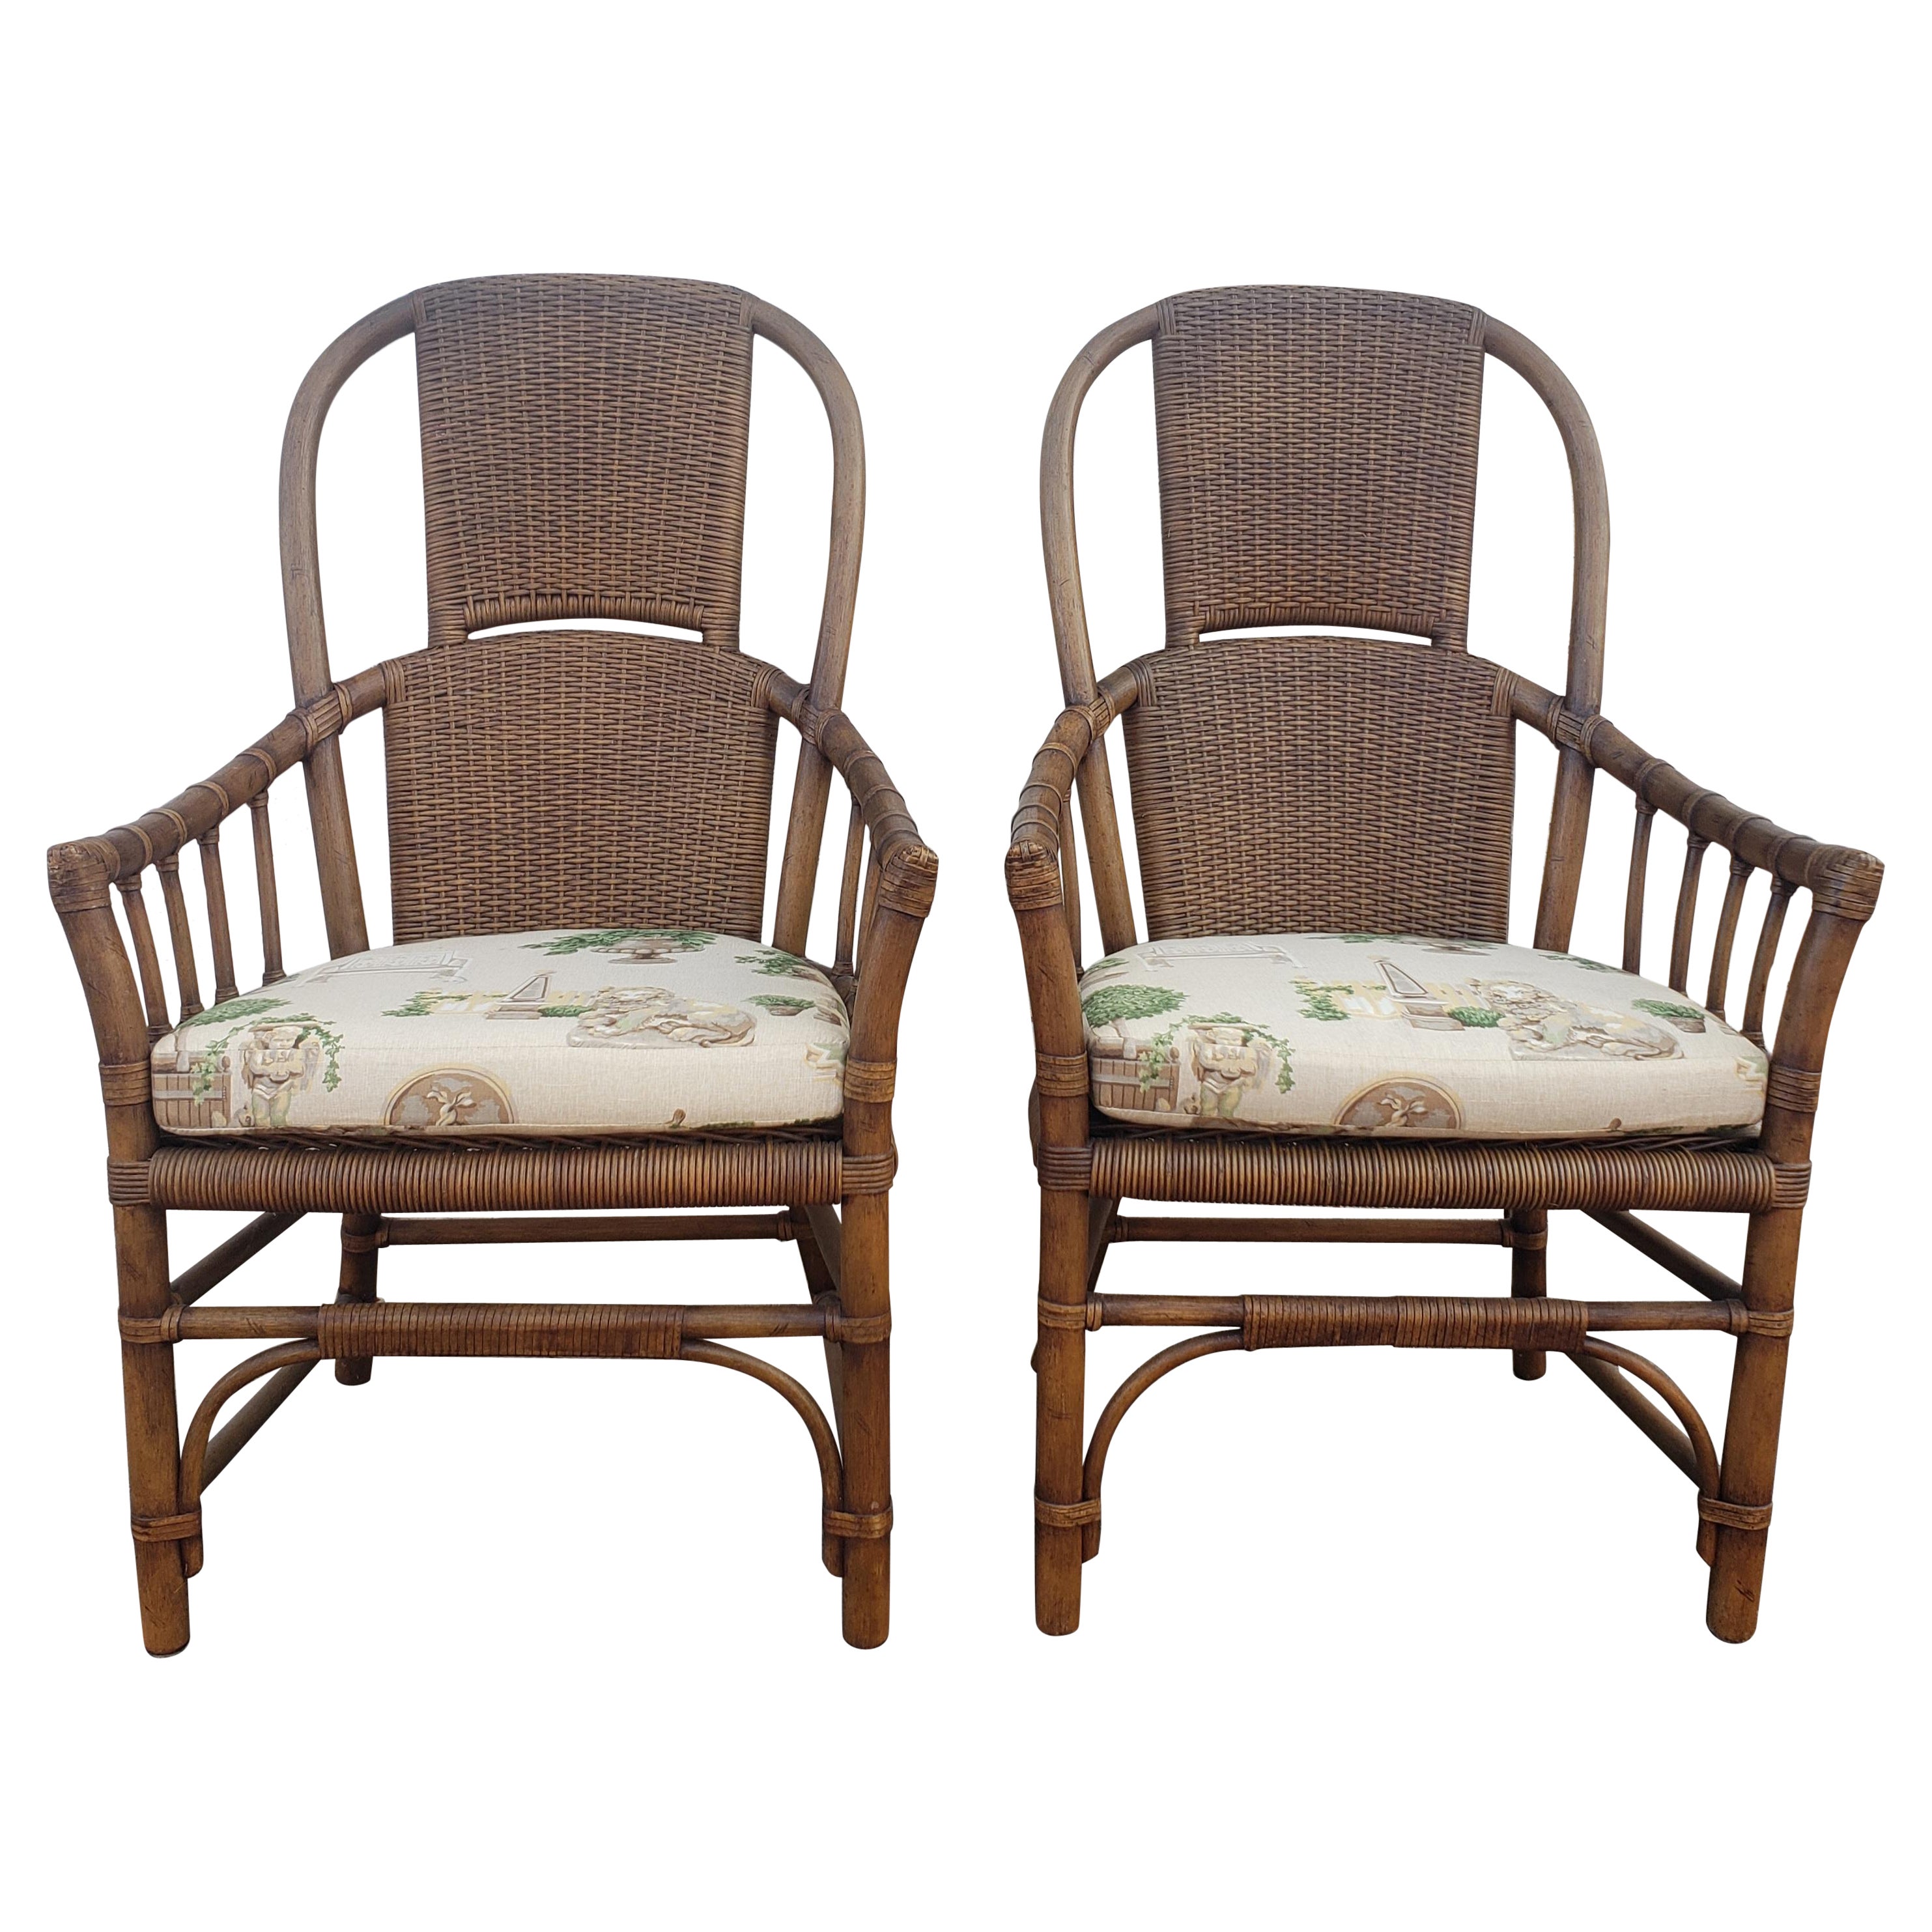 1970s High Hoop Back Rattan and Leather Straps Arm Chairs, a Pair For Sale